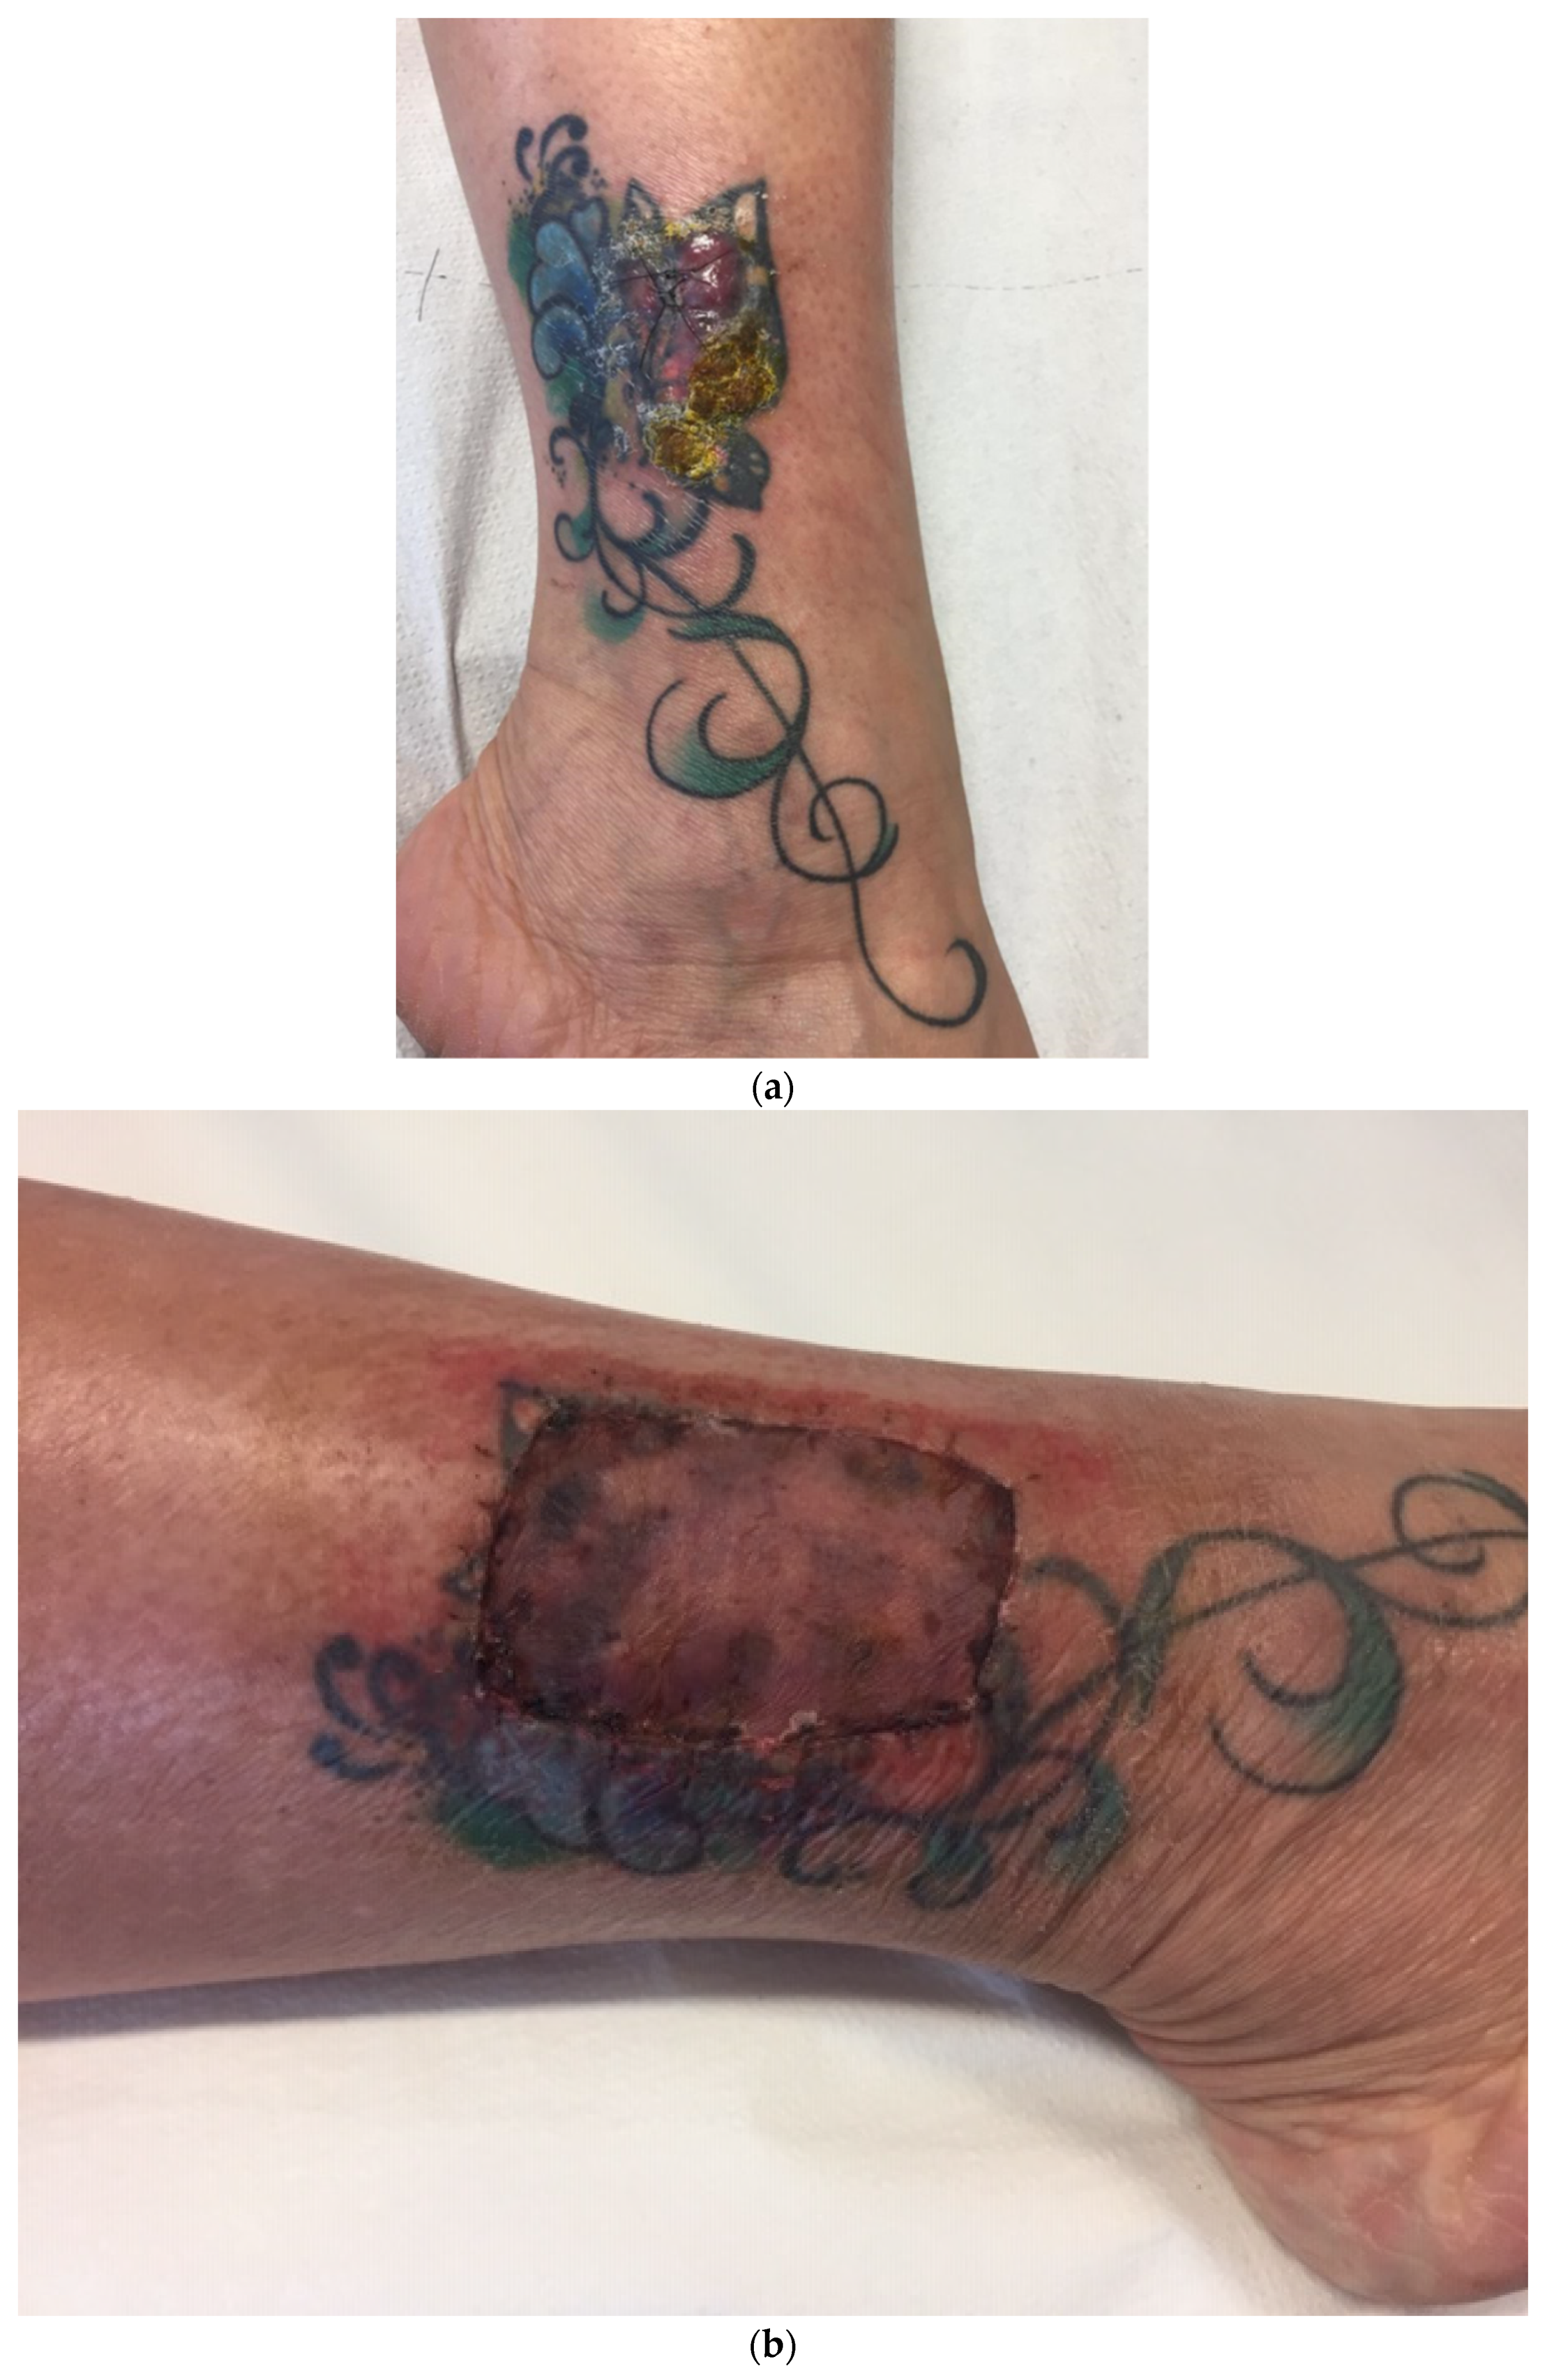 Diagnostic Approach for Suspected Allergic Cutaneous Reaction to a  Permanent Tattoo